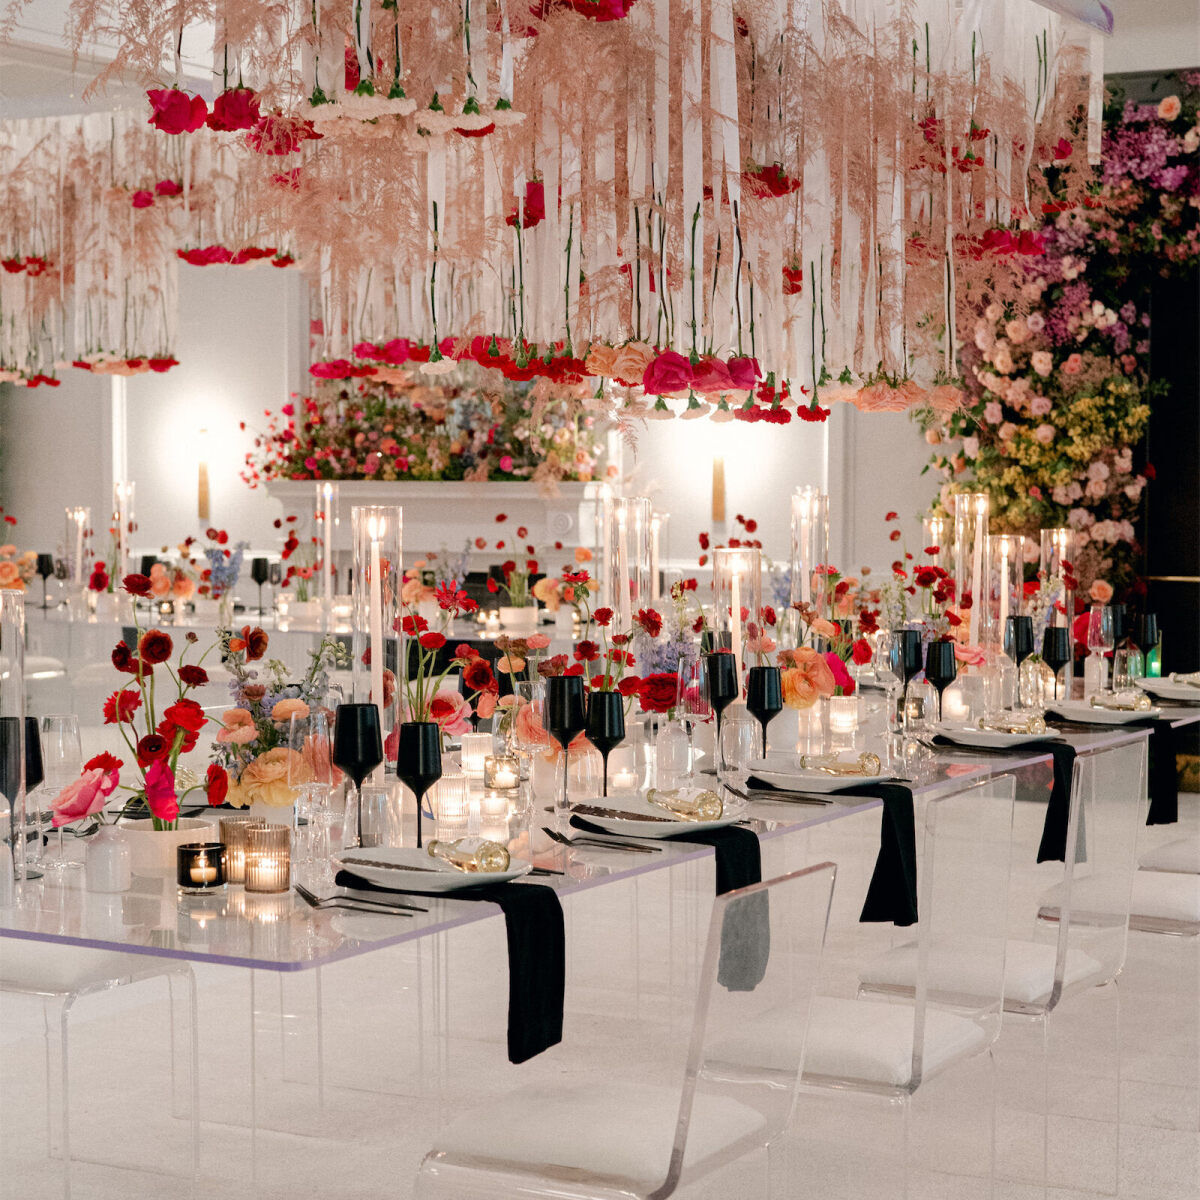 Ceiling Wedding Decor: Roses hanging upside down at a rainbow-colored reception space with long glass tables and acrylic chairs.